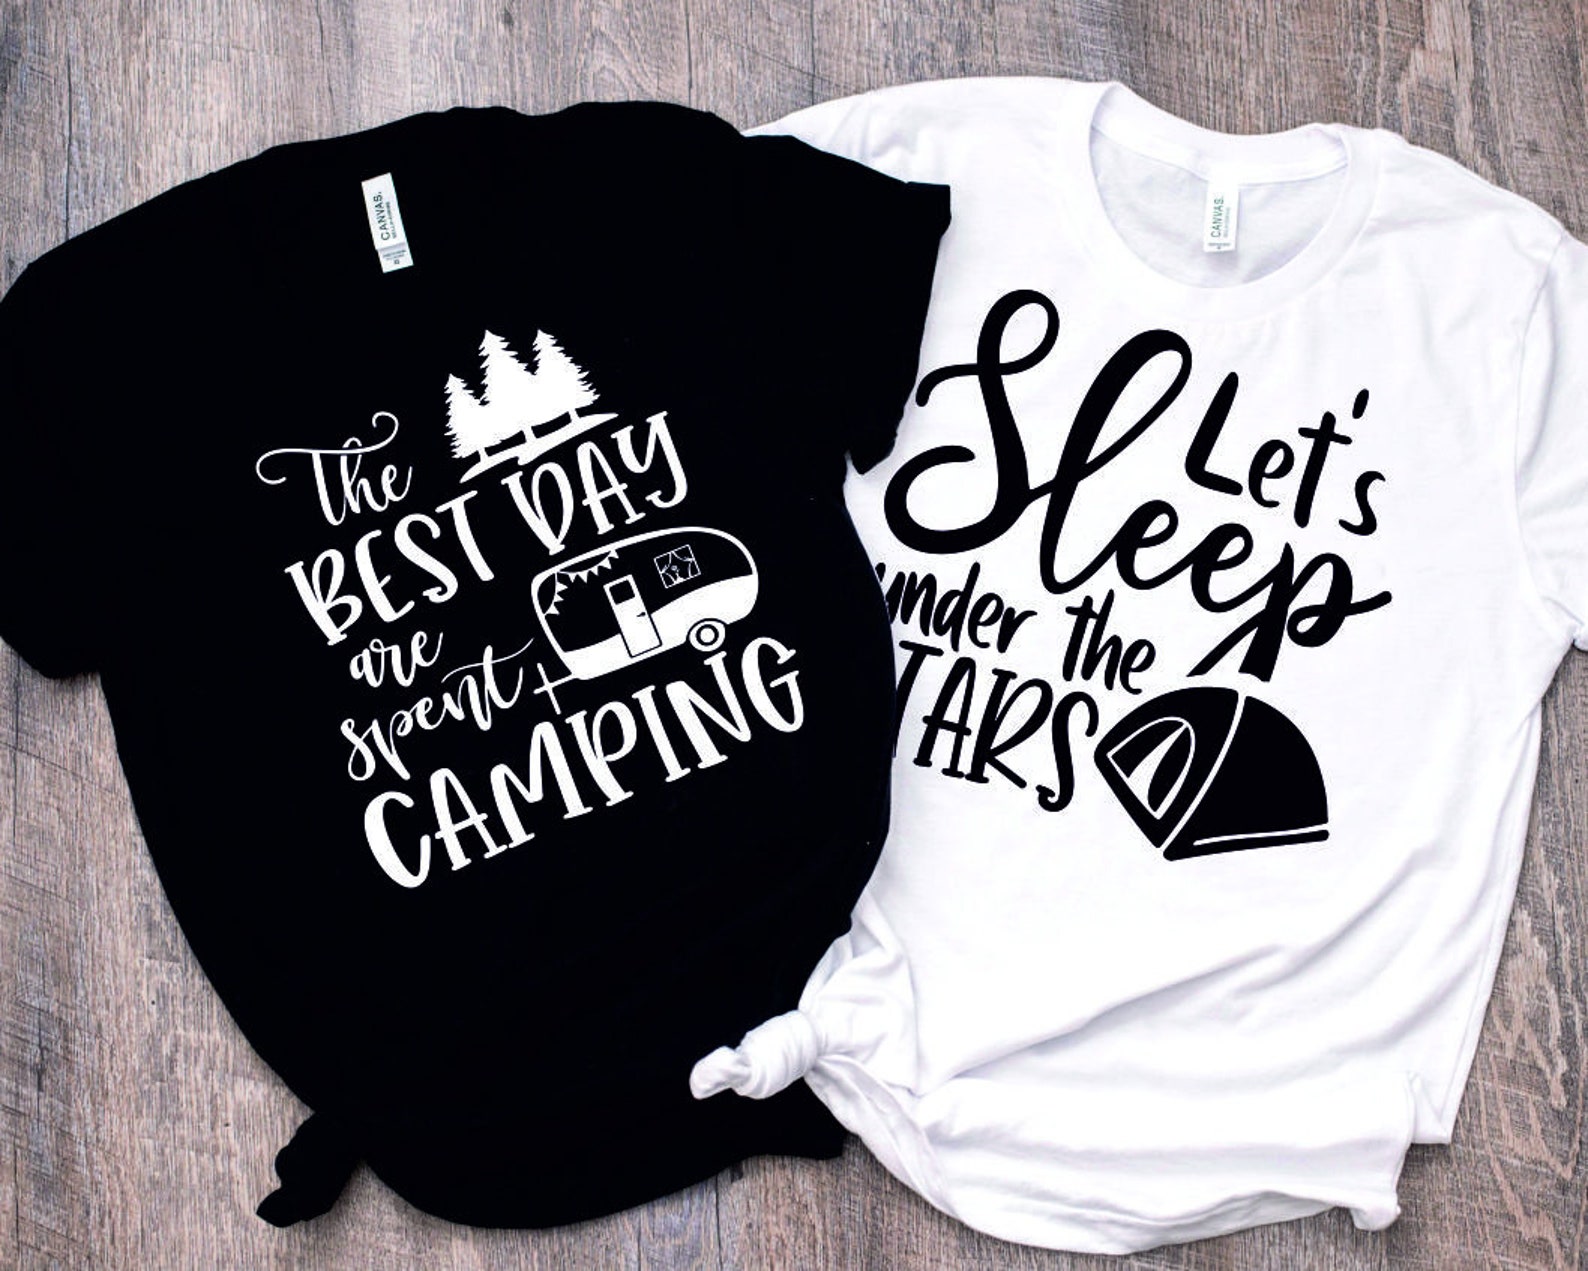 Diverse of the t-shirt camping design.